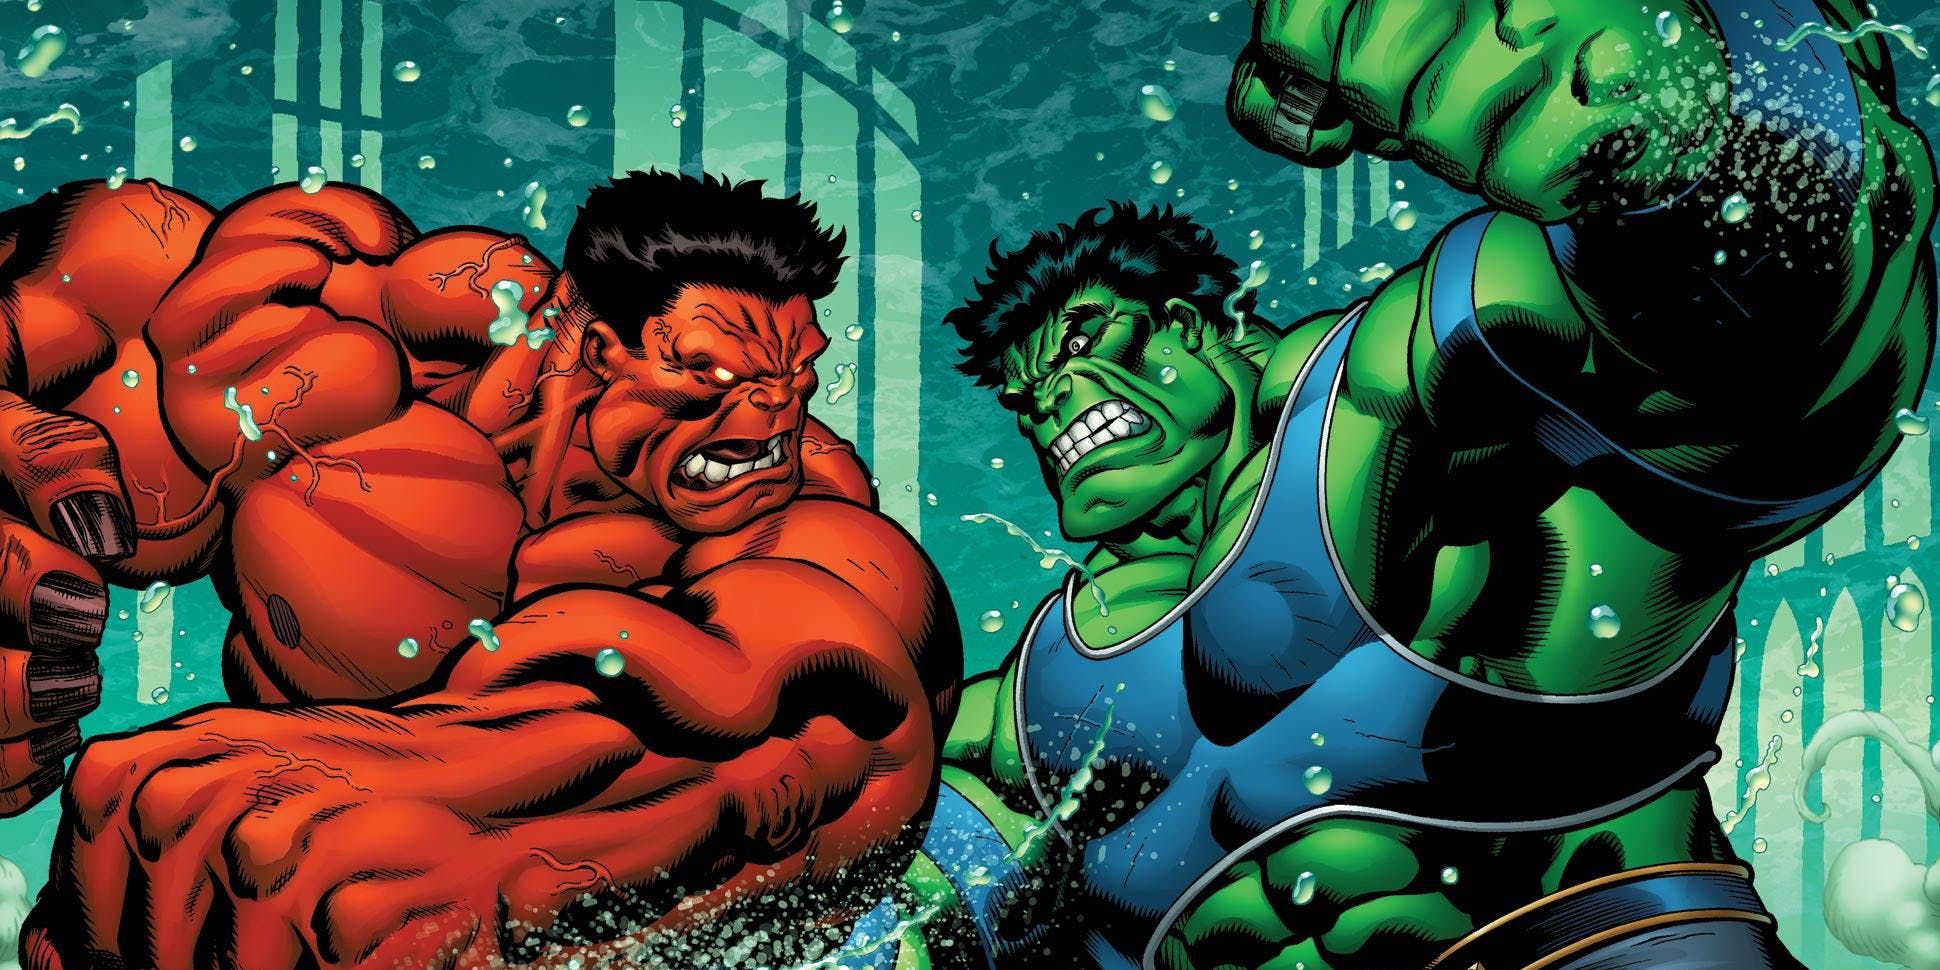 Thrashed by Red Hulk